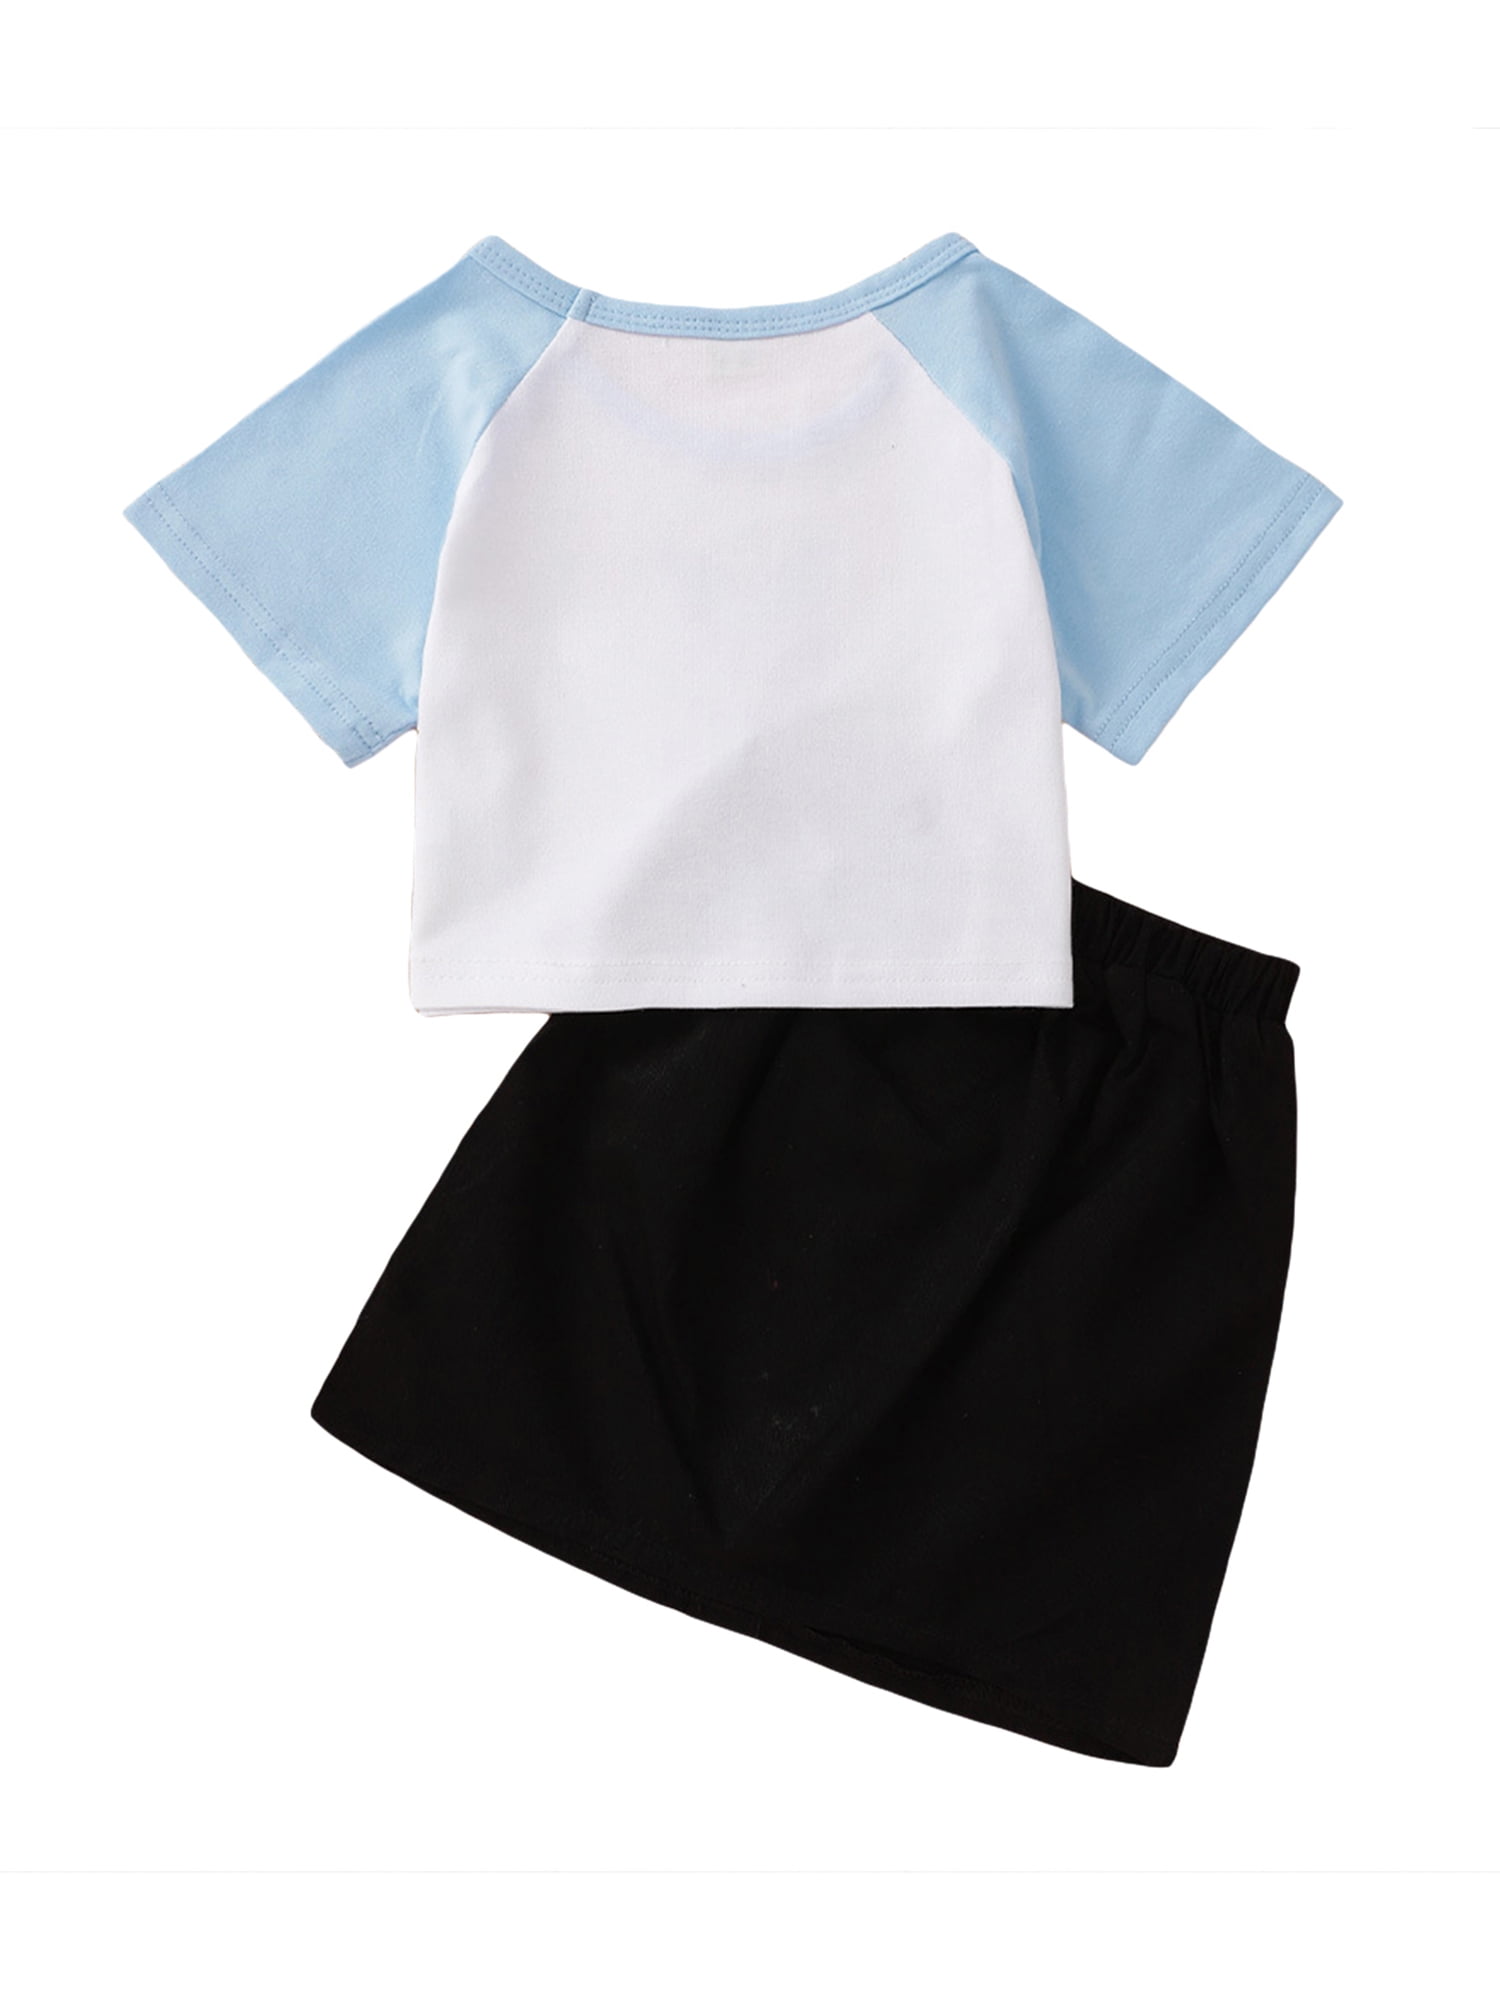 Toddler Baby Girls Summer Outfits Shorts Kids Ruffle T-Shirt Crop Tops and  Pants Clothes Set 